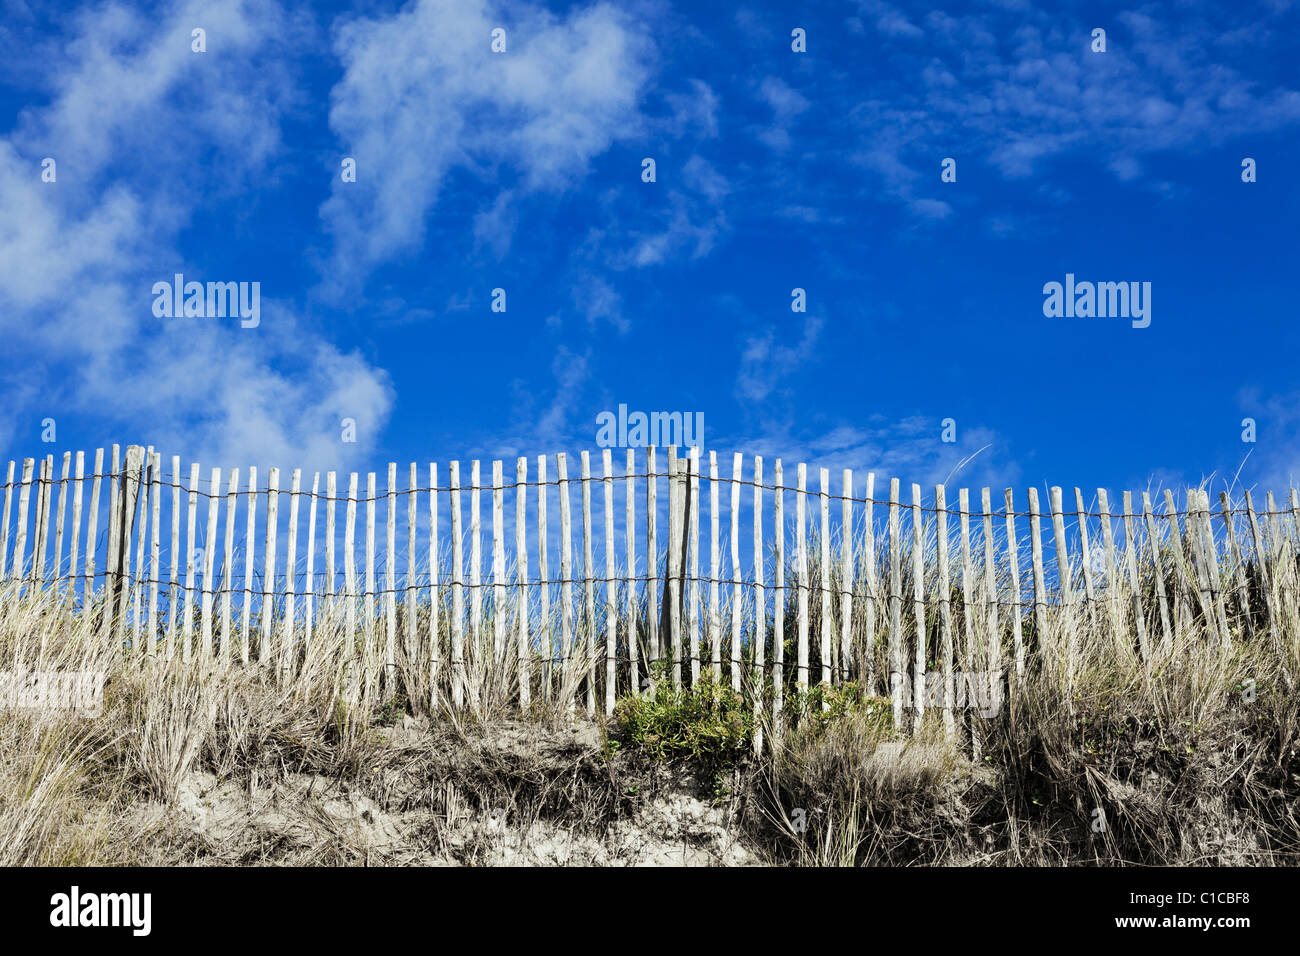 Wooden picket fence on sand dune with blue sky, France, Europe Stock Photo